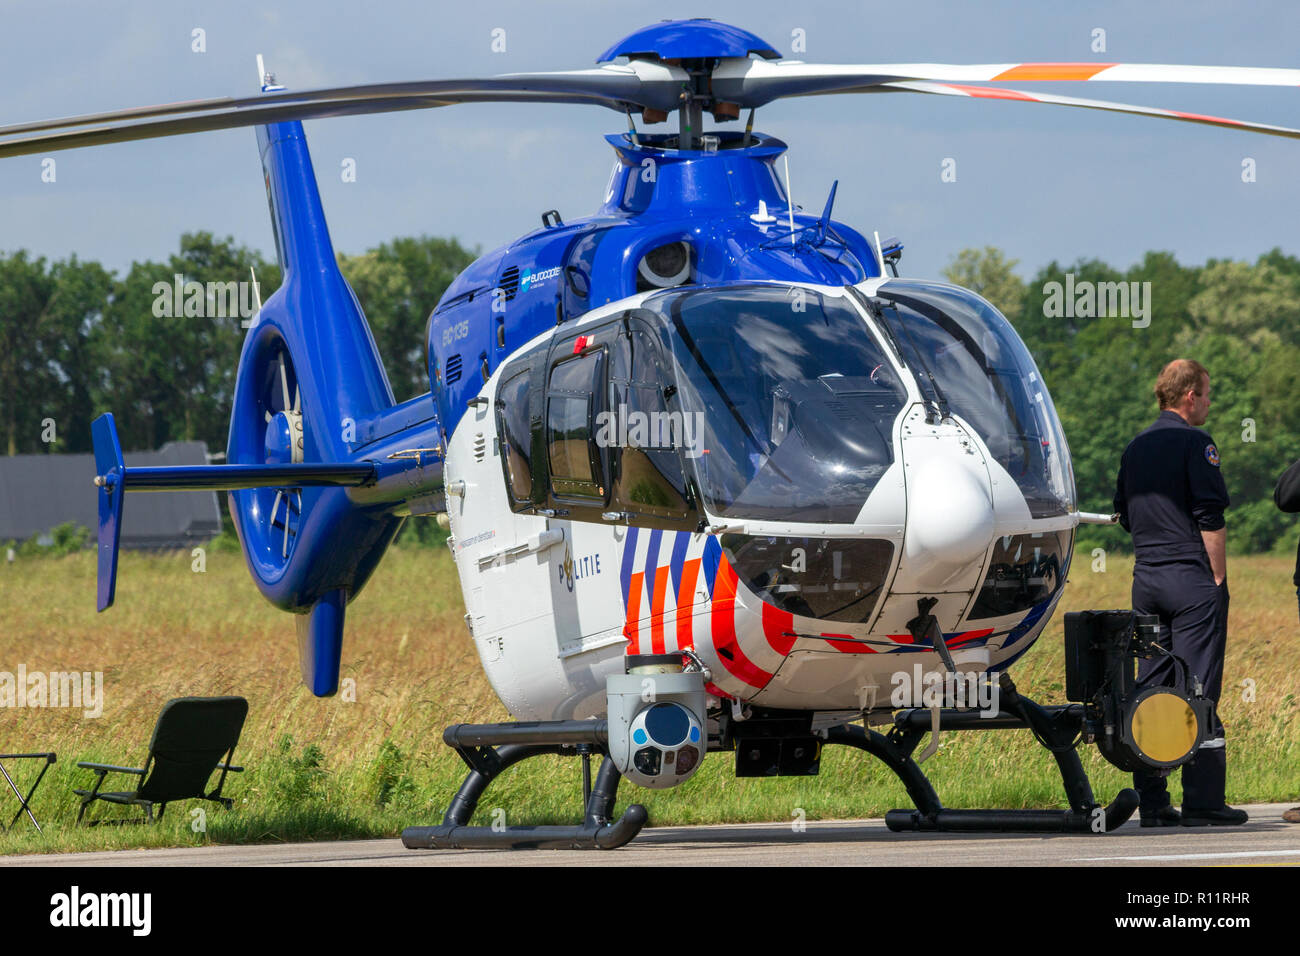 VOLKEL, NETHERLANDS - JUN 14, 2013: Dutch Airbus-Eurocopter EC-135 police helicopter at the Royal Netherlands Air Force Days. Stock Photo